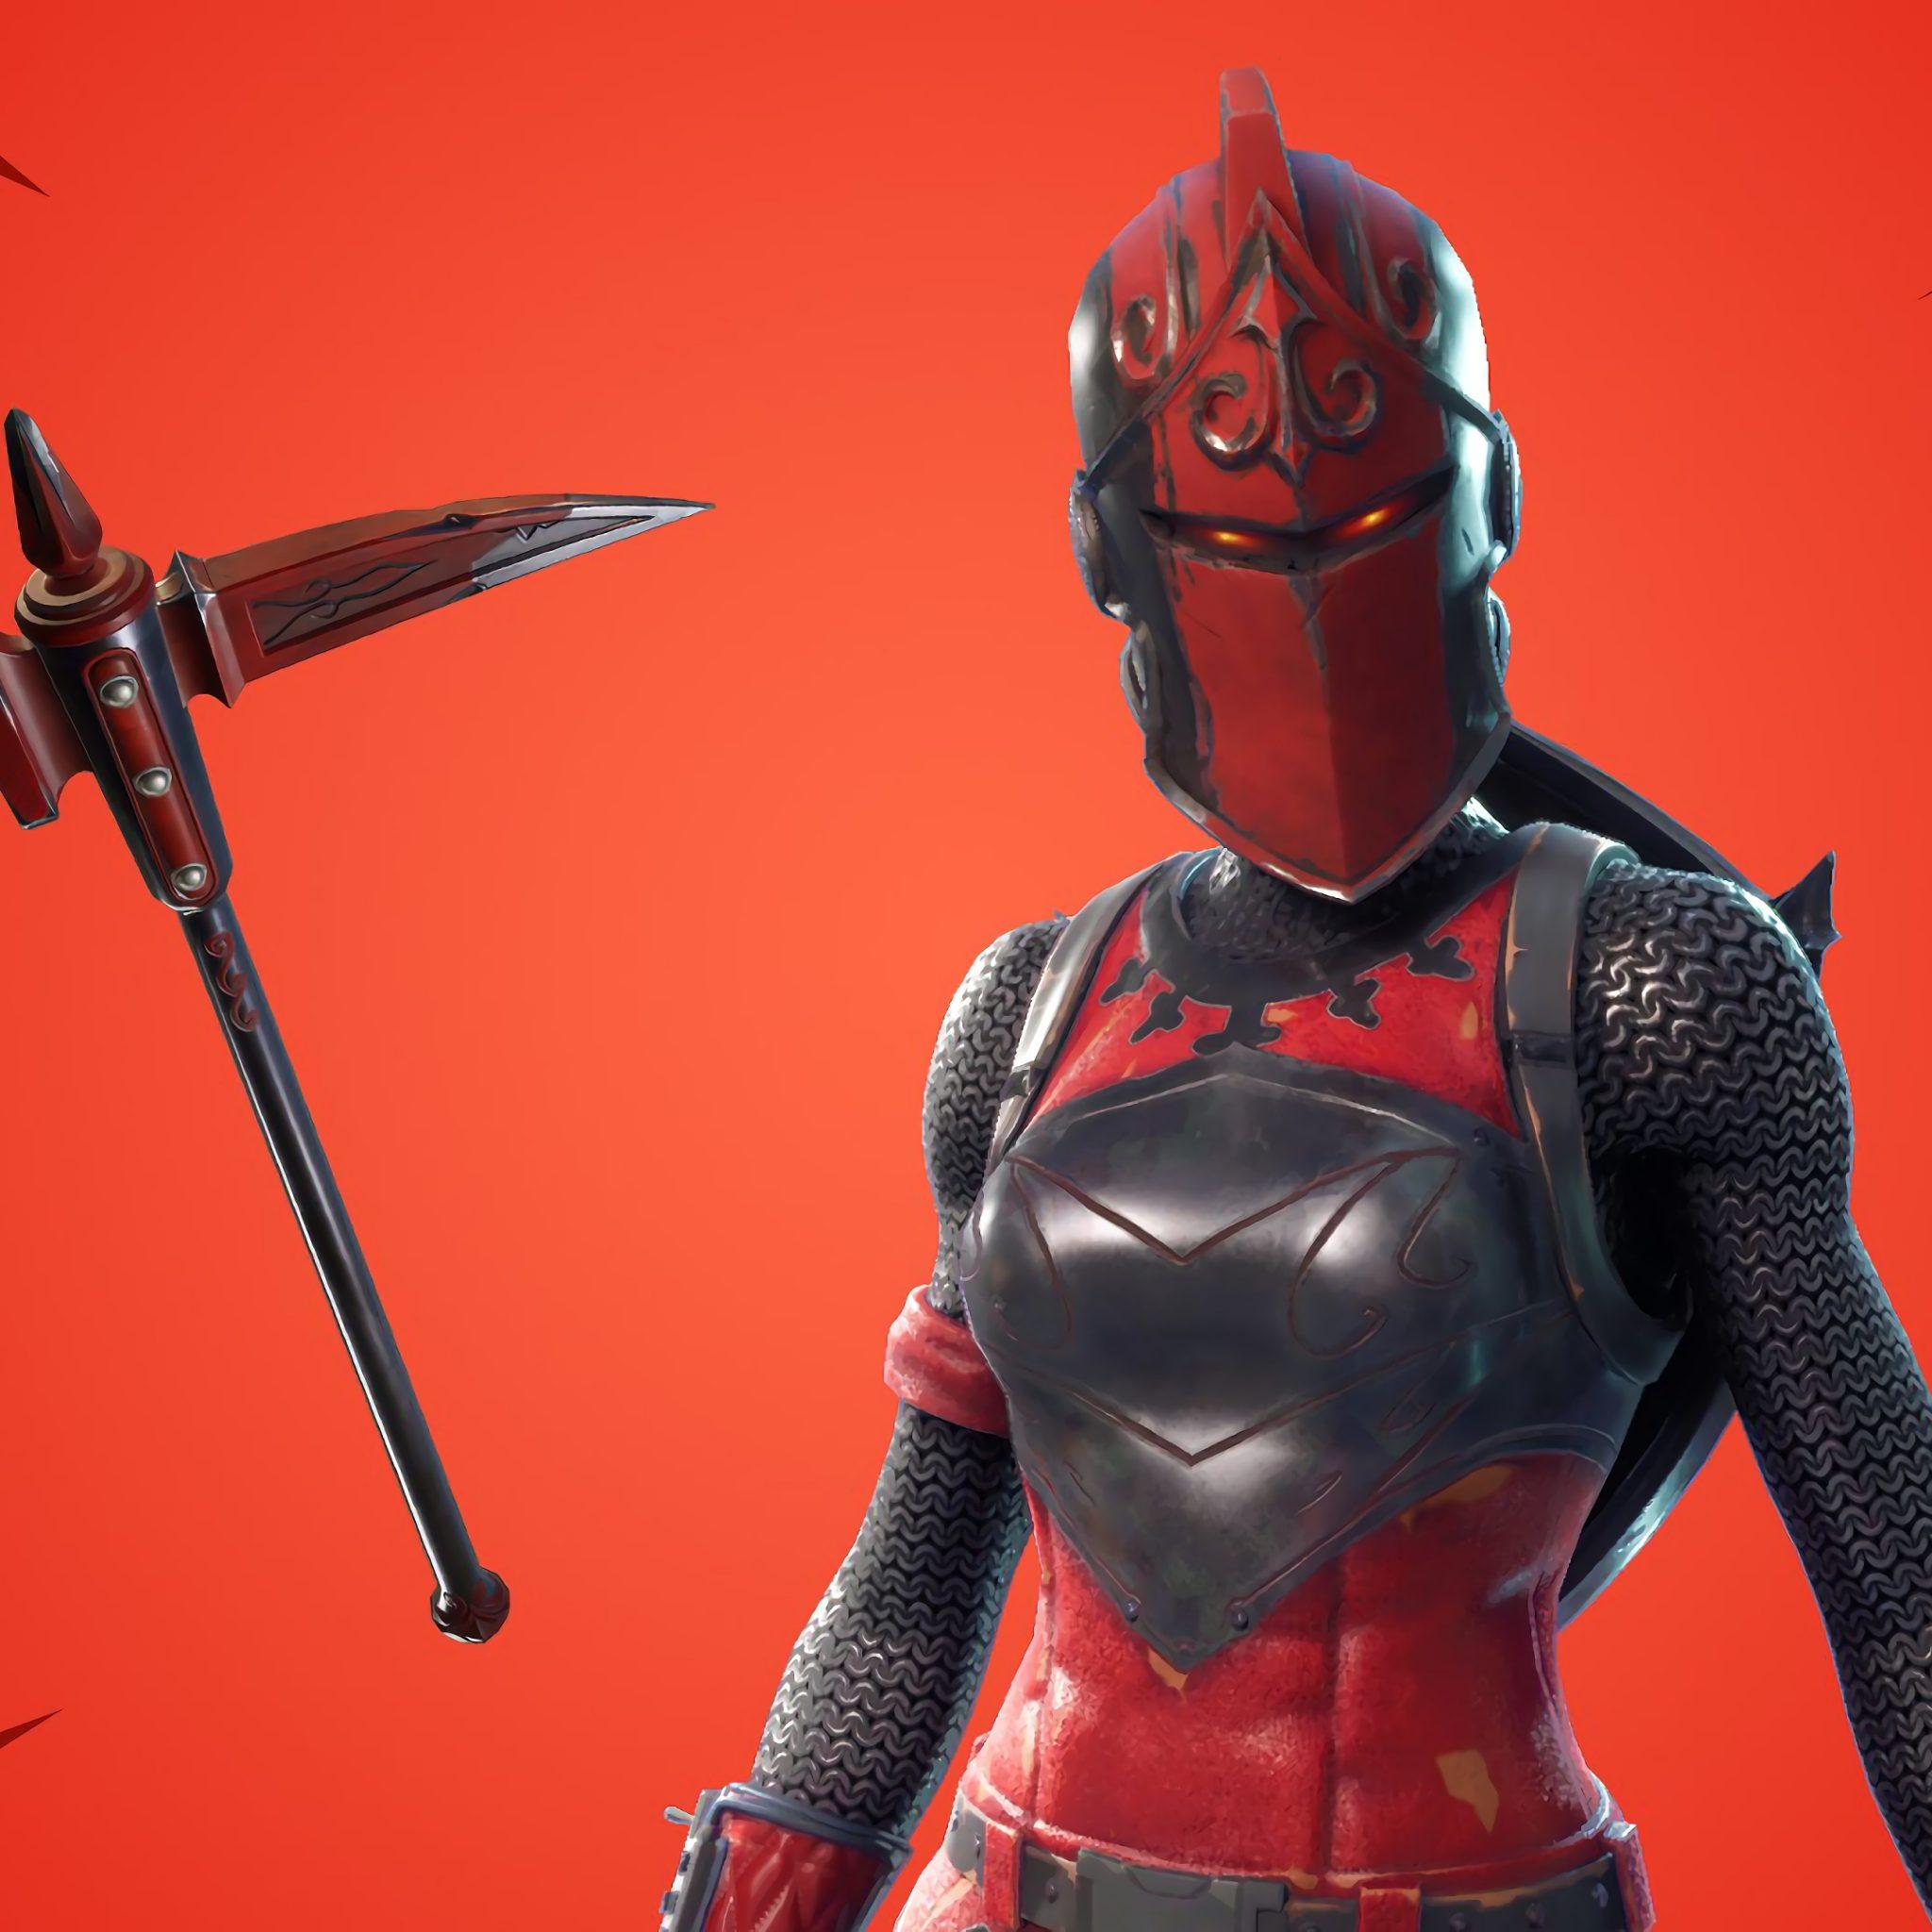 Official Wallpaper Of Red Knight From Fortnite Game